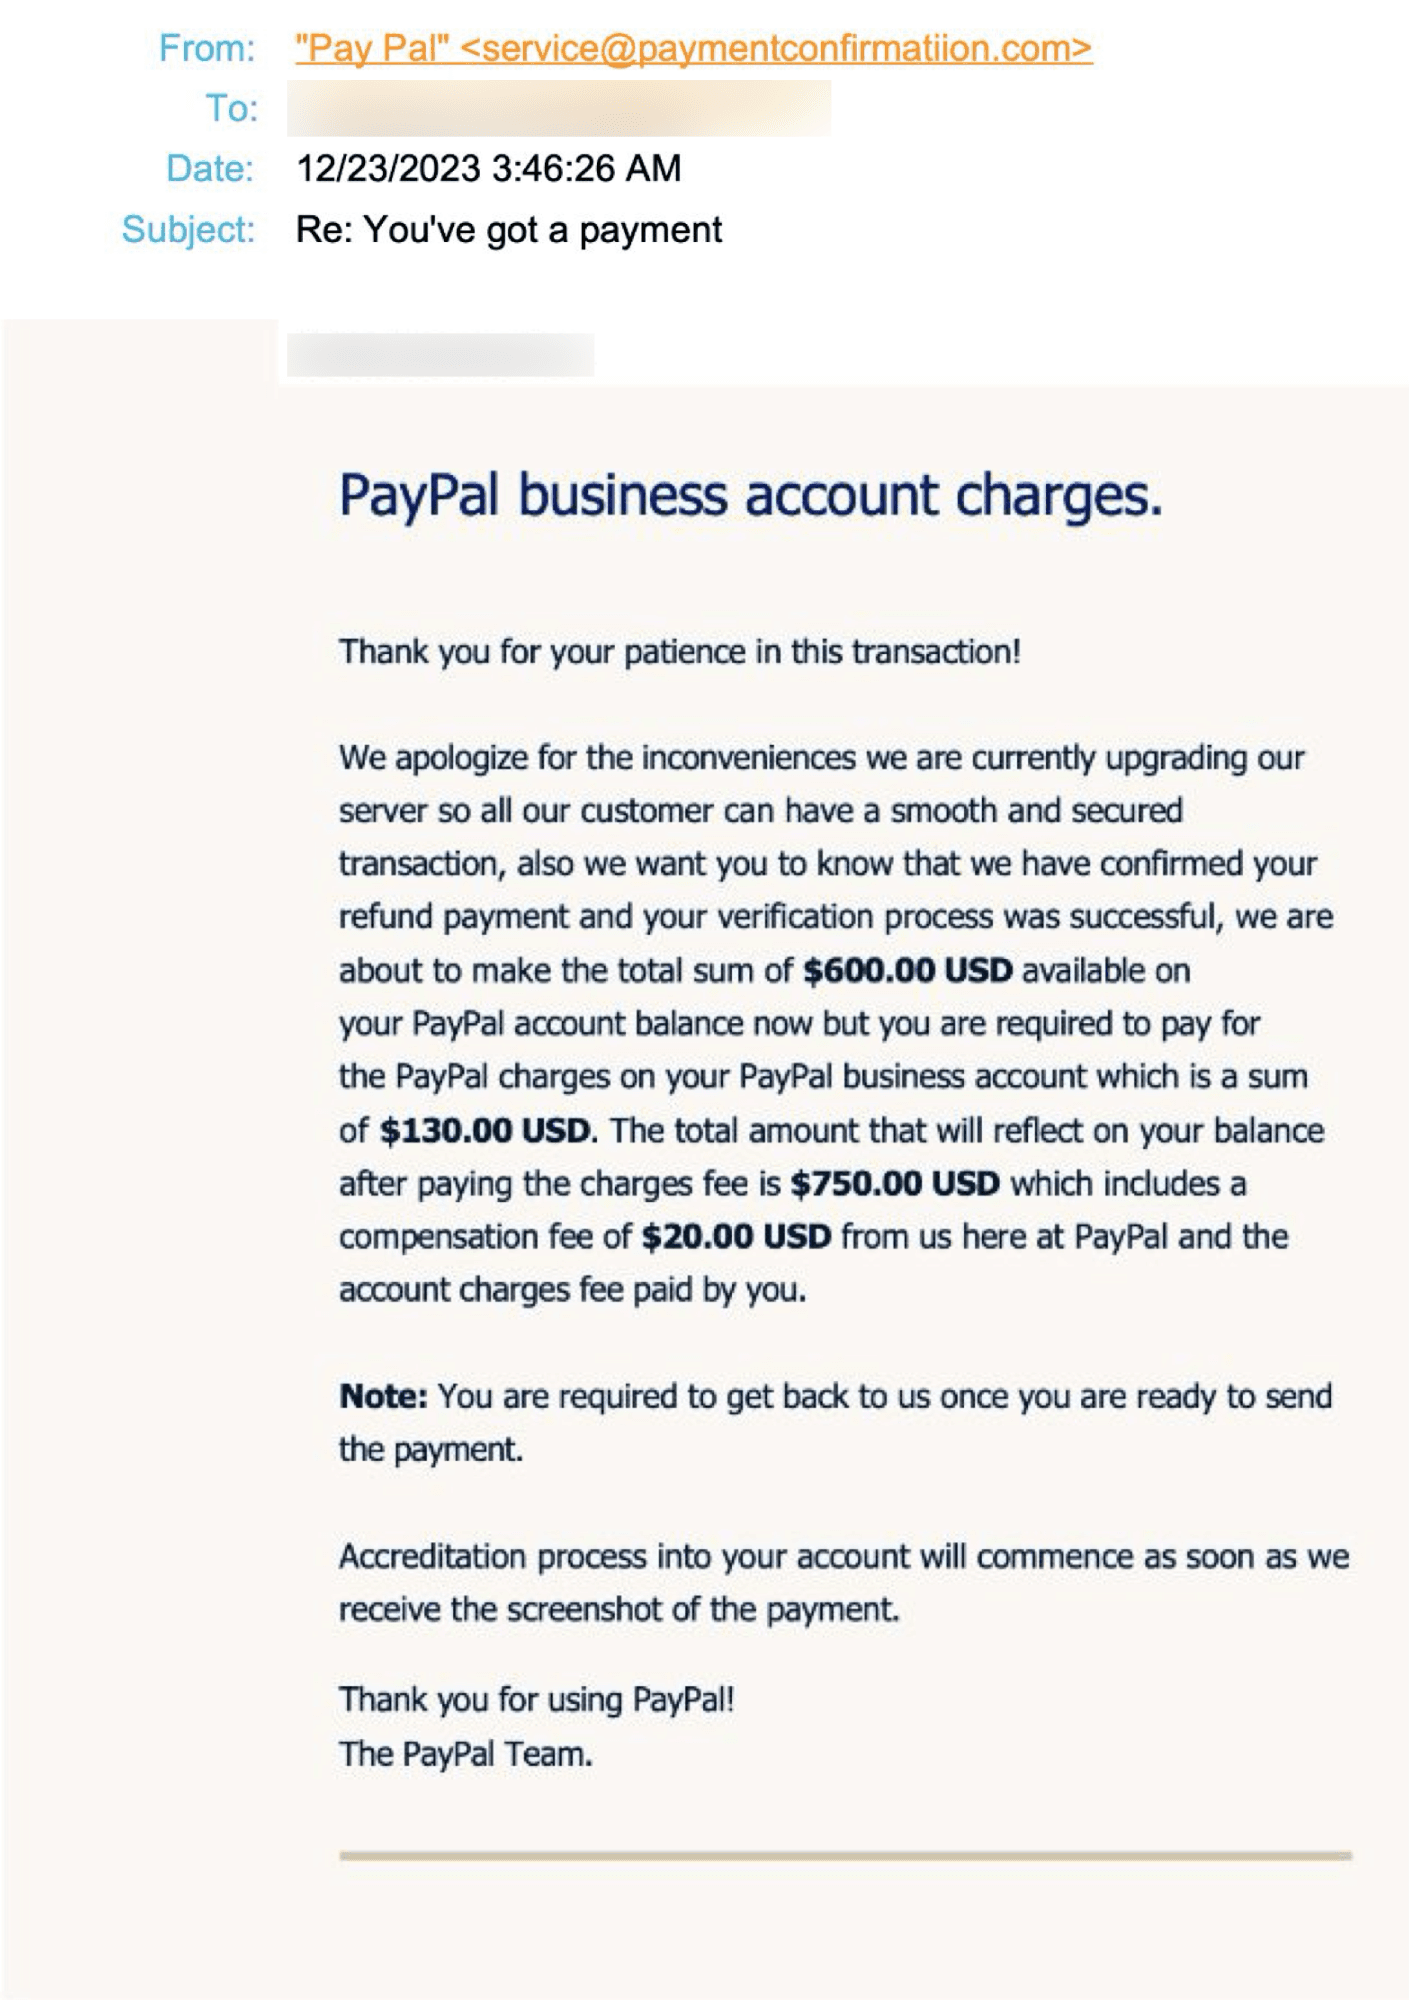 AL Pay Pal Business Account Refund Email E